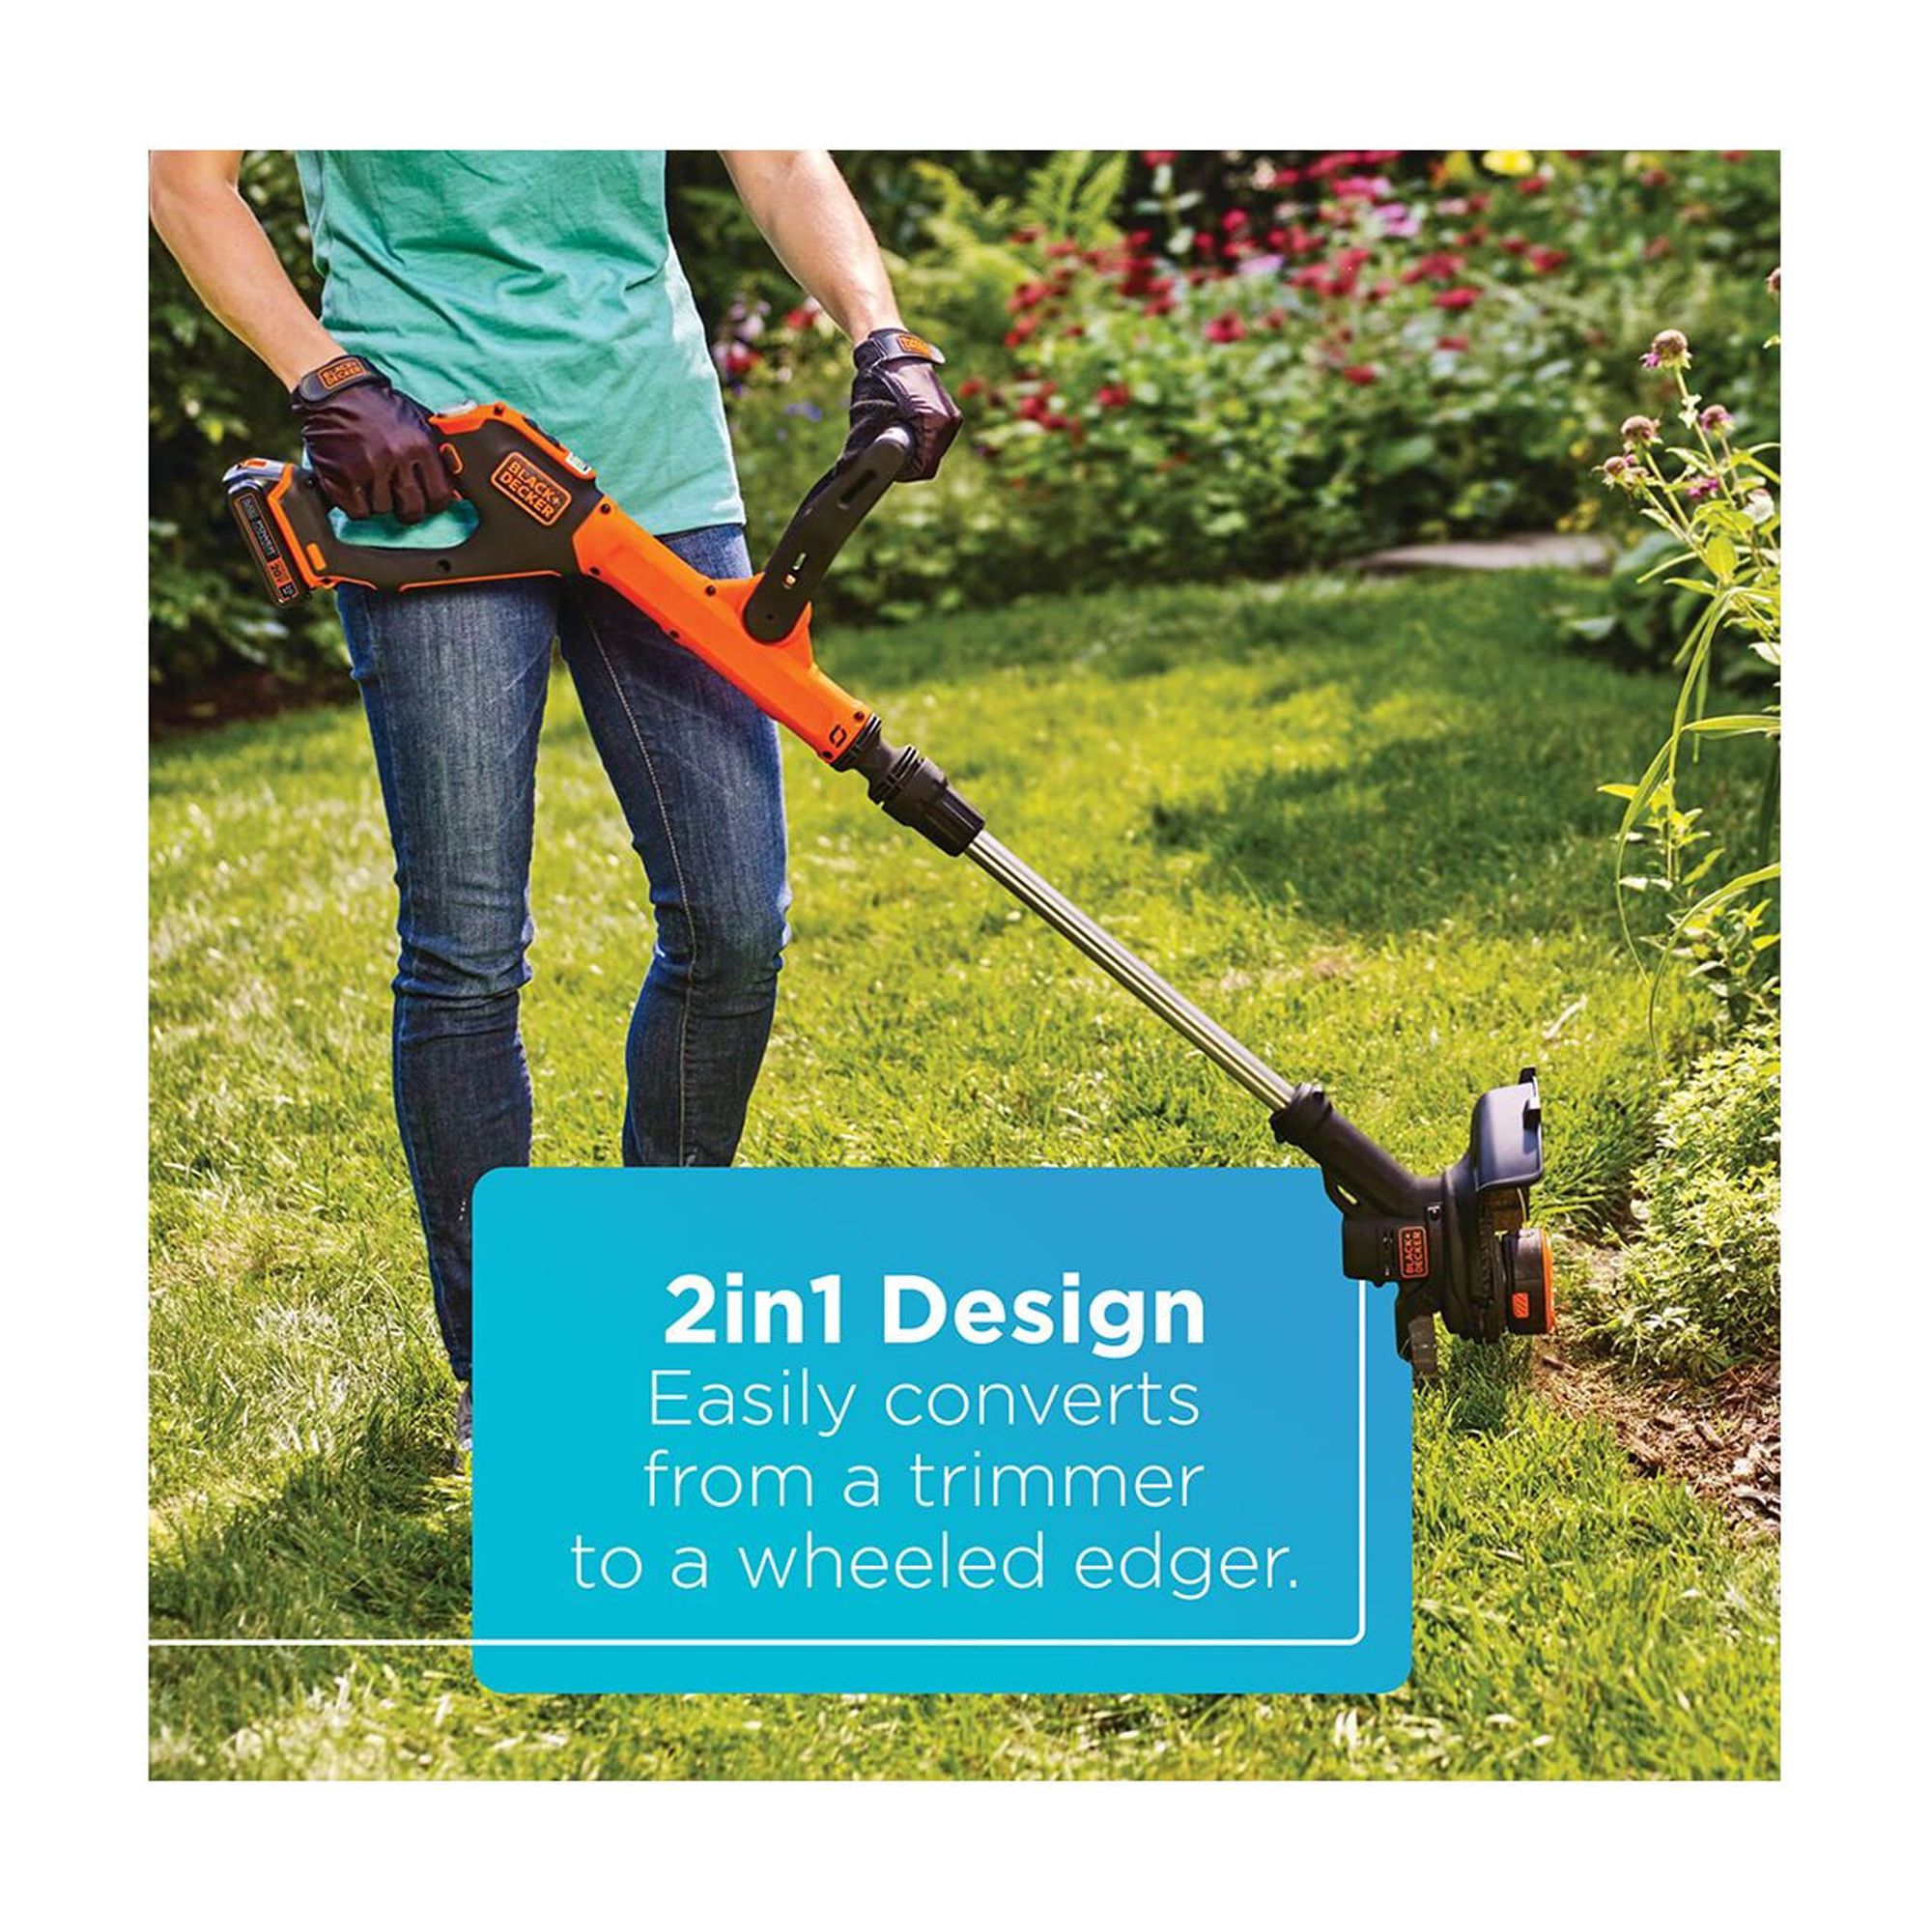 20V MAX Cordless Lithium-Ion EASYFEED 2-Speed 12 in. String Trimmer/Edger Kit - image 5 of 13